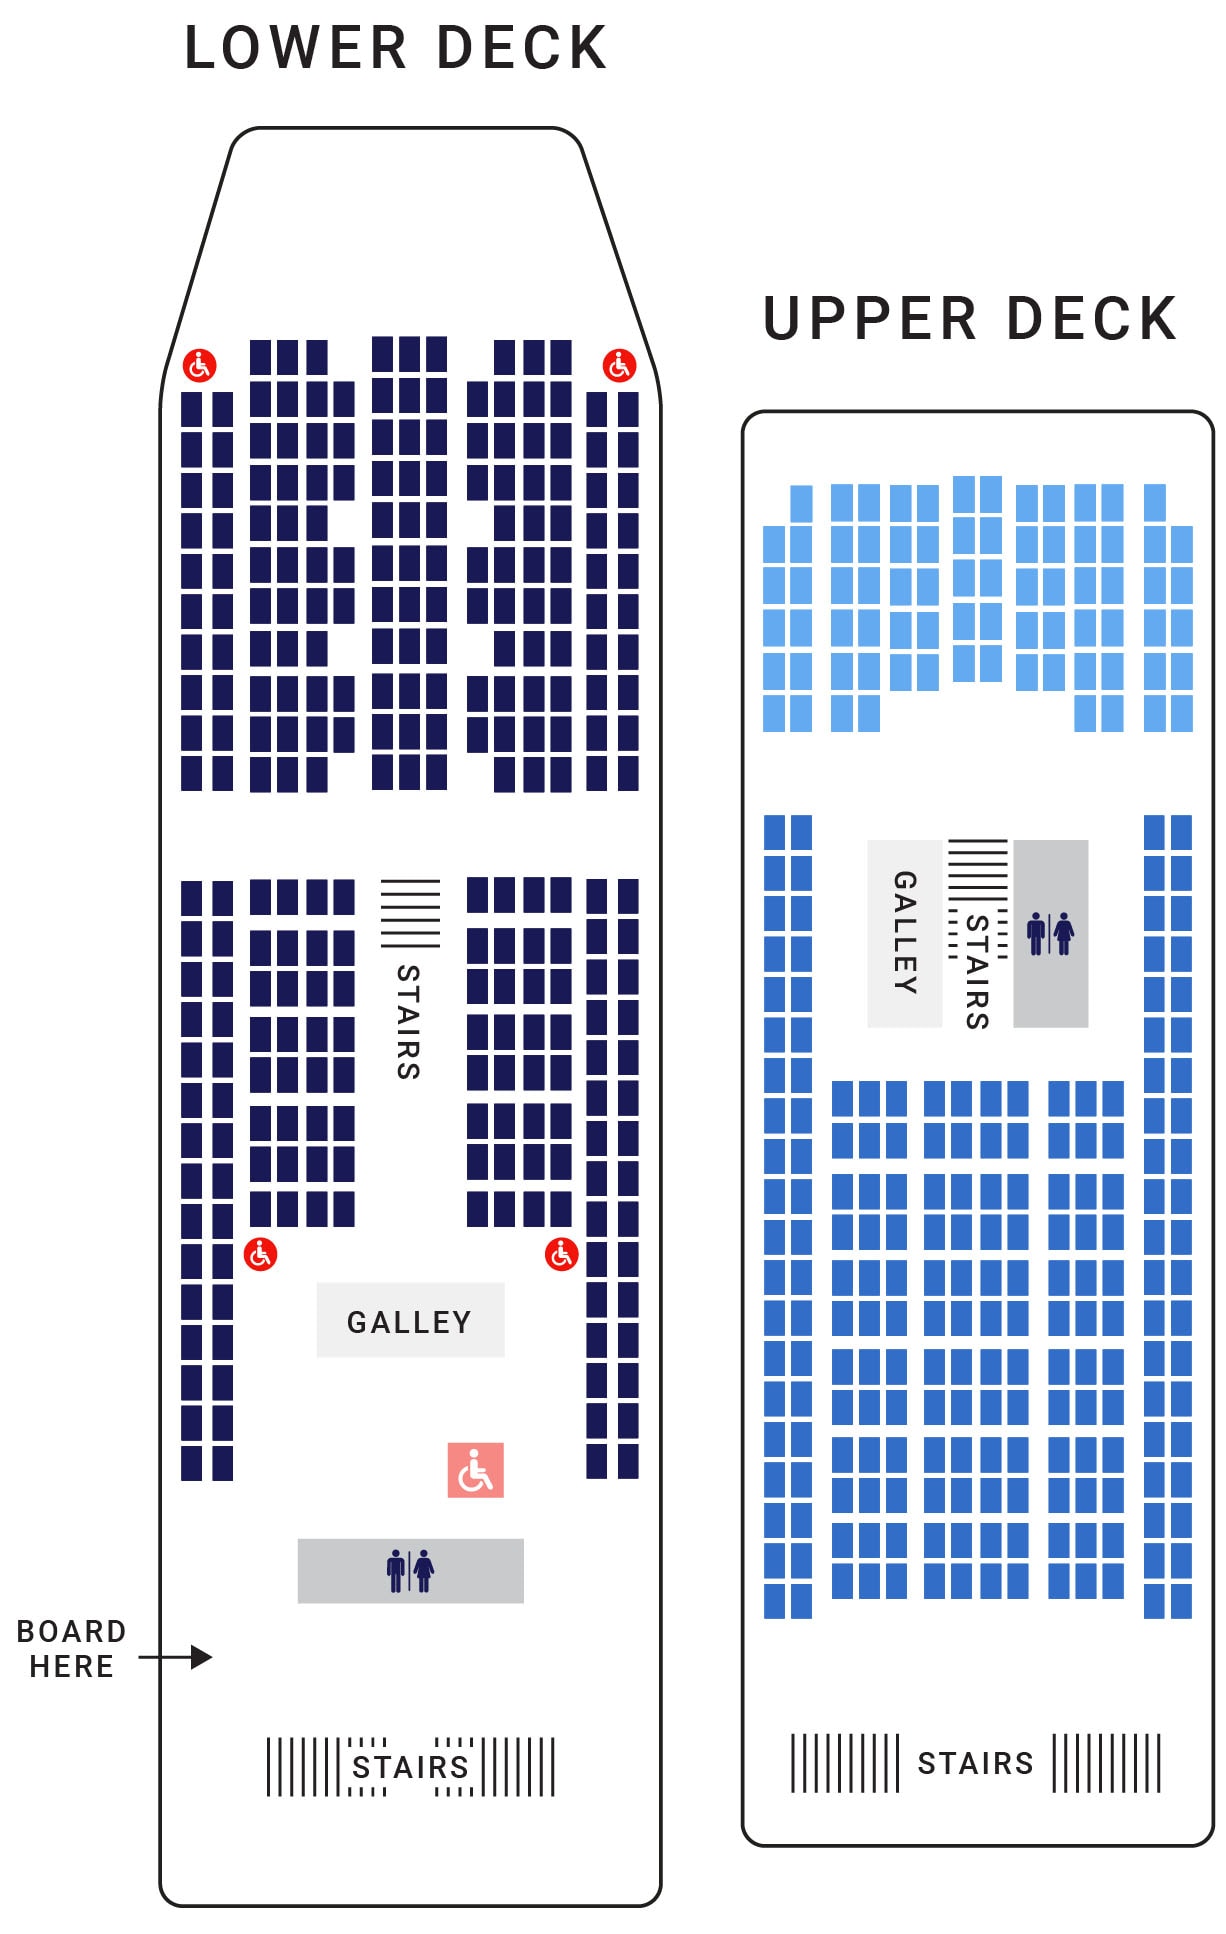 Victoria Clipper V Deck and Seating Layout